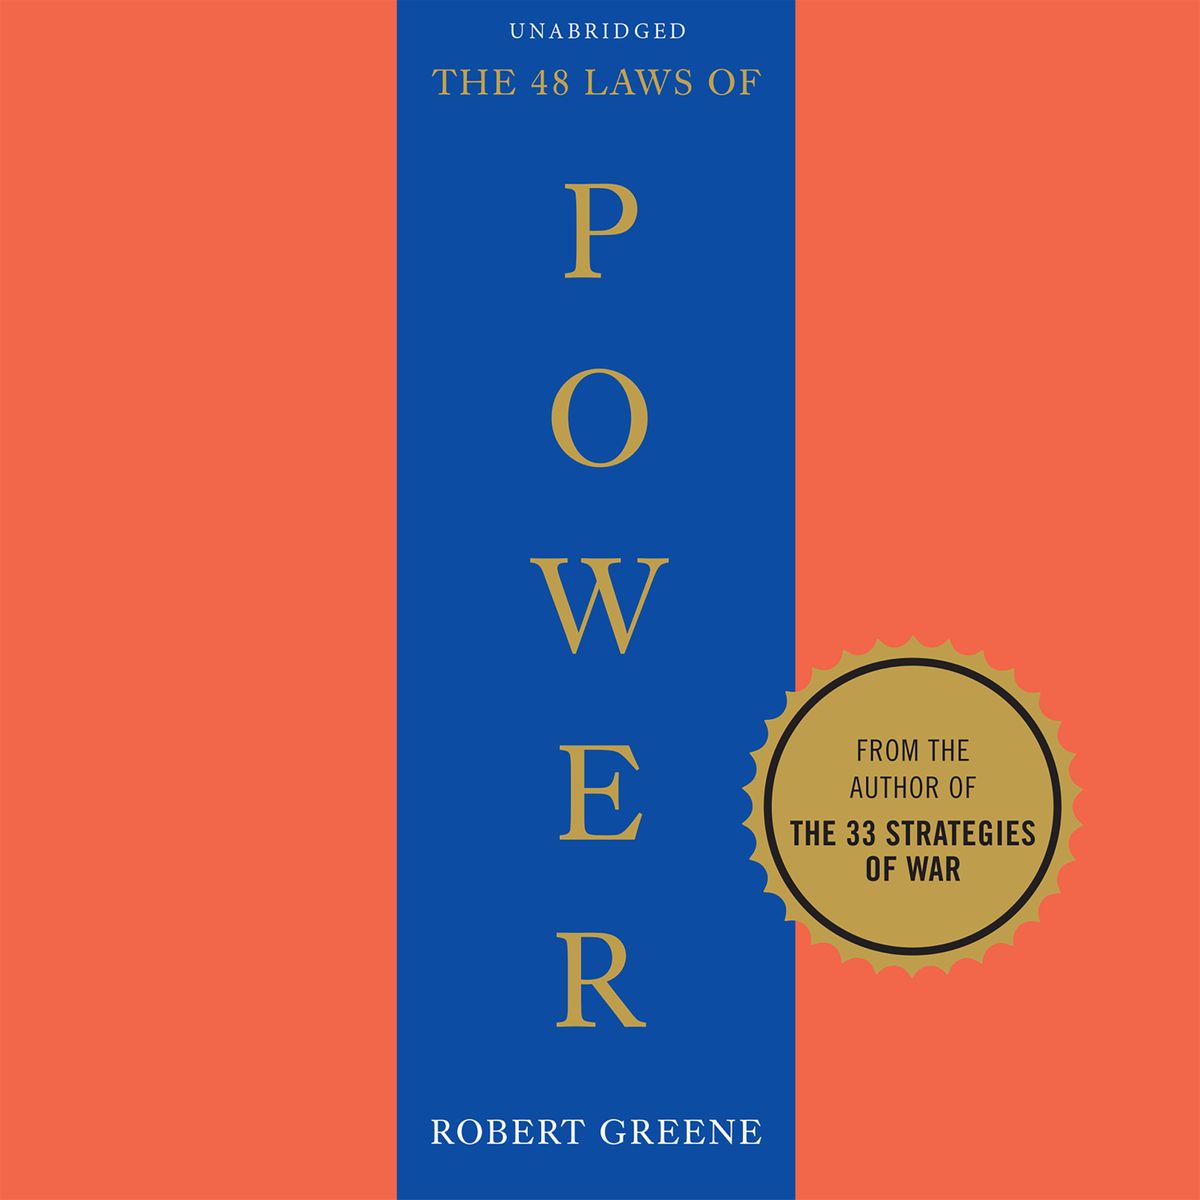 48 laws of power book recommendation